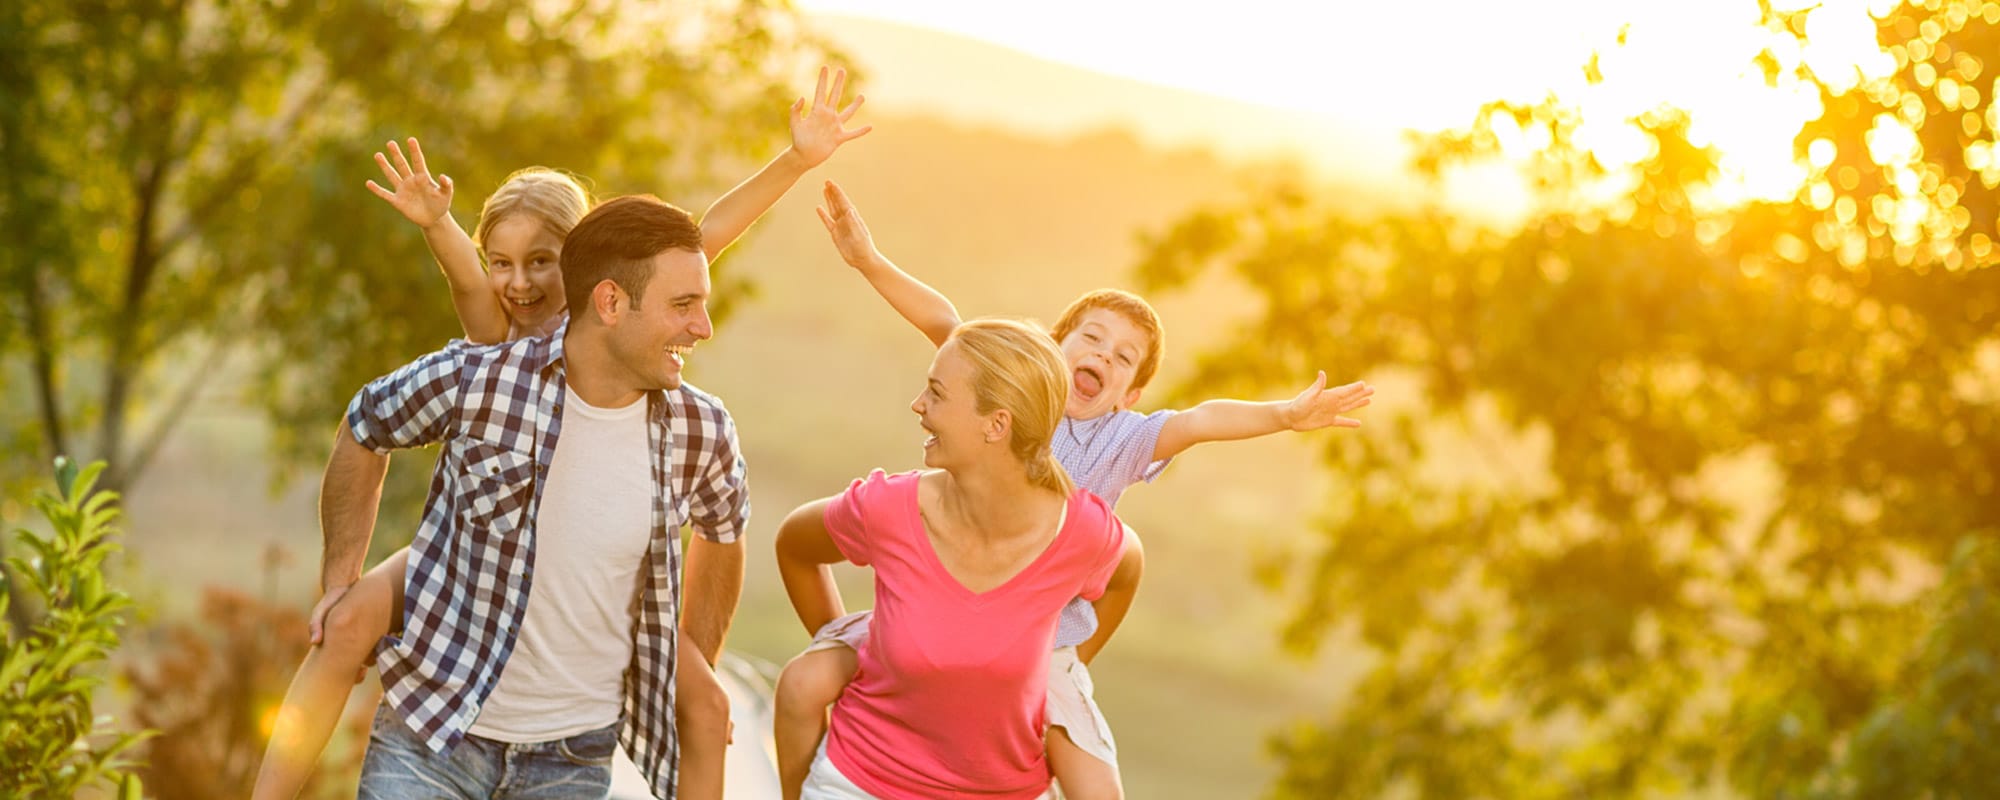 Image of a happy family walking through a medow during a sunset